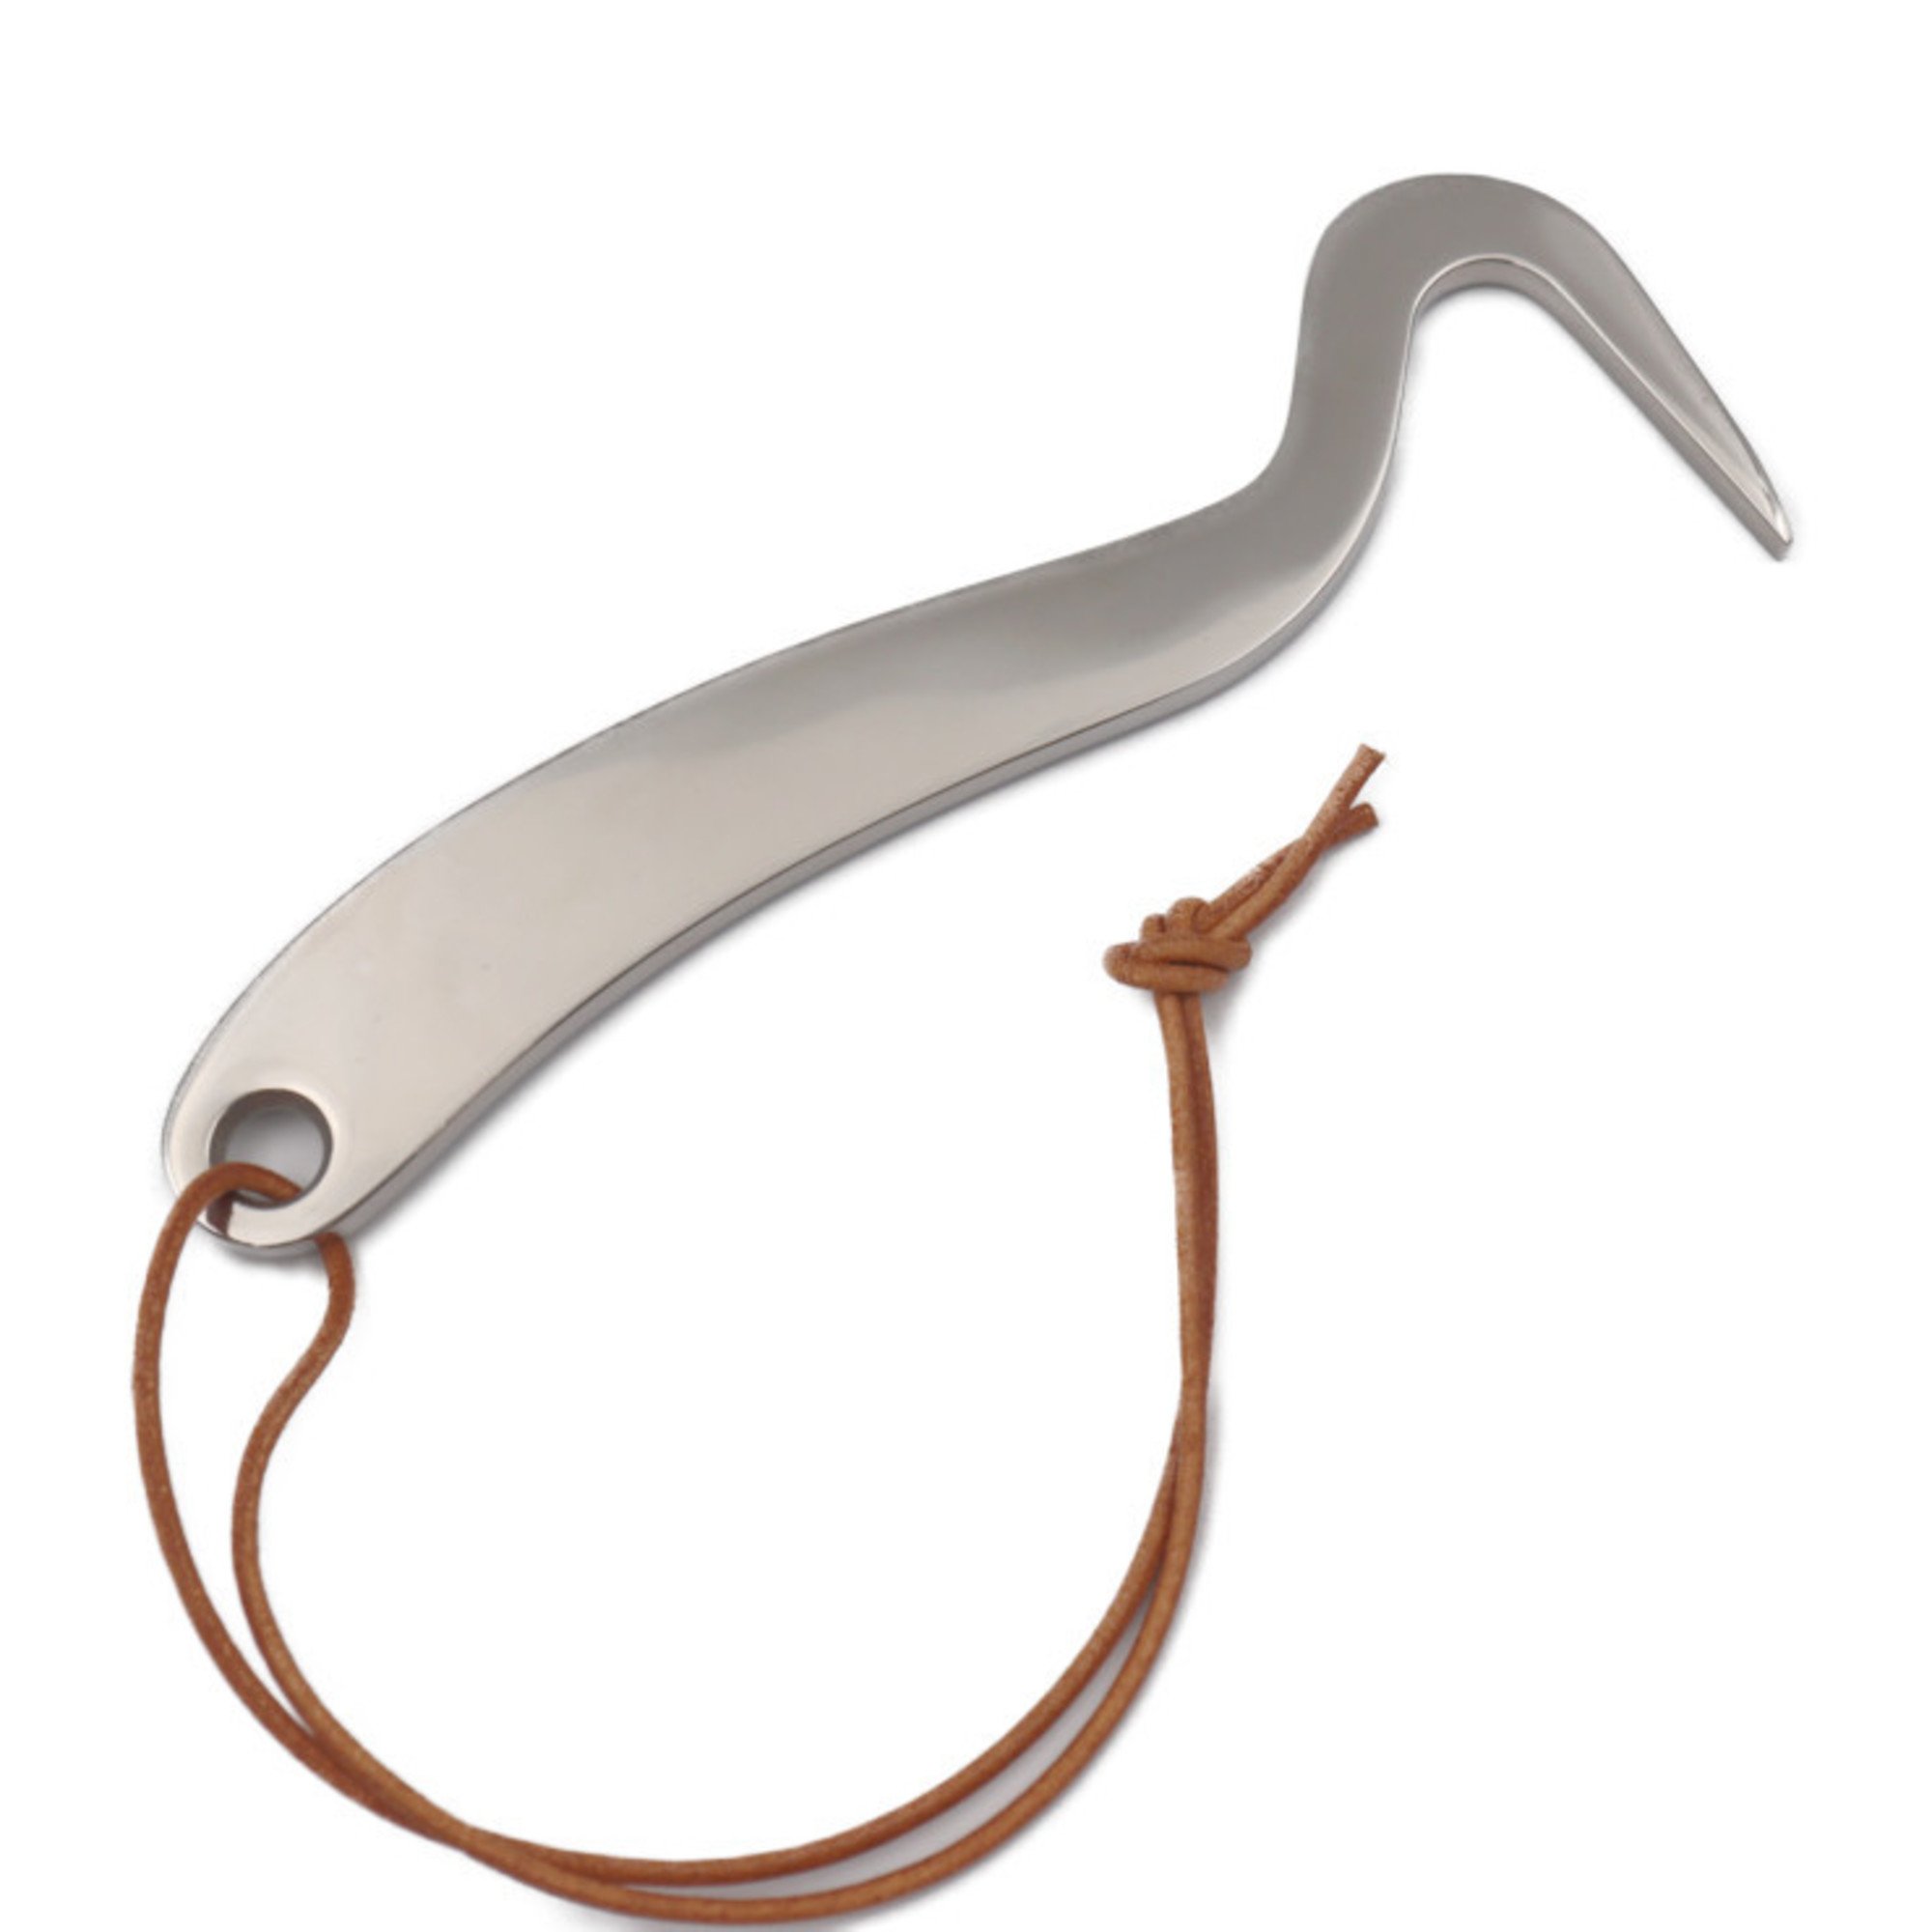 HERMES Hermes Hoof Pick Other Miscellaneous Goods Metal Silver Top Horseshoe Digging Horse Tack